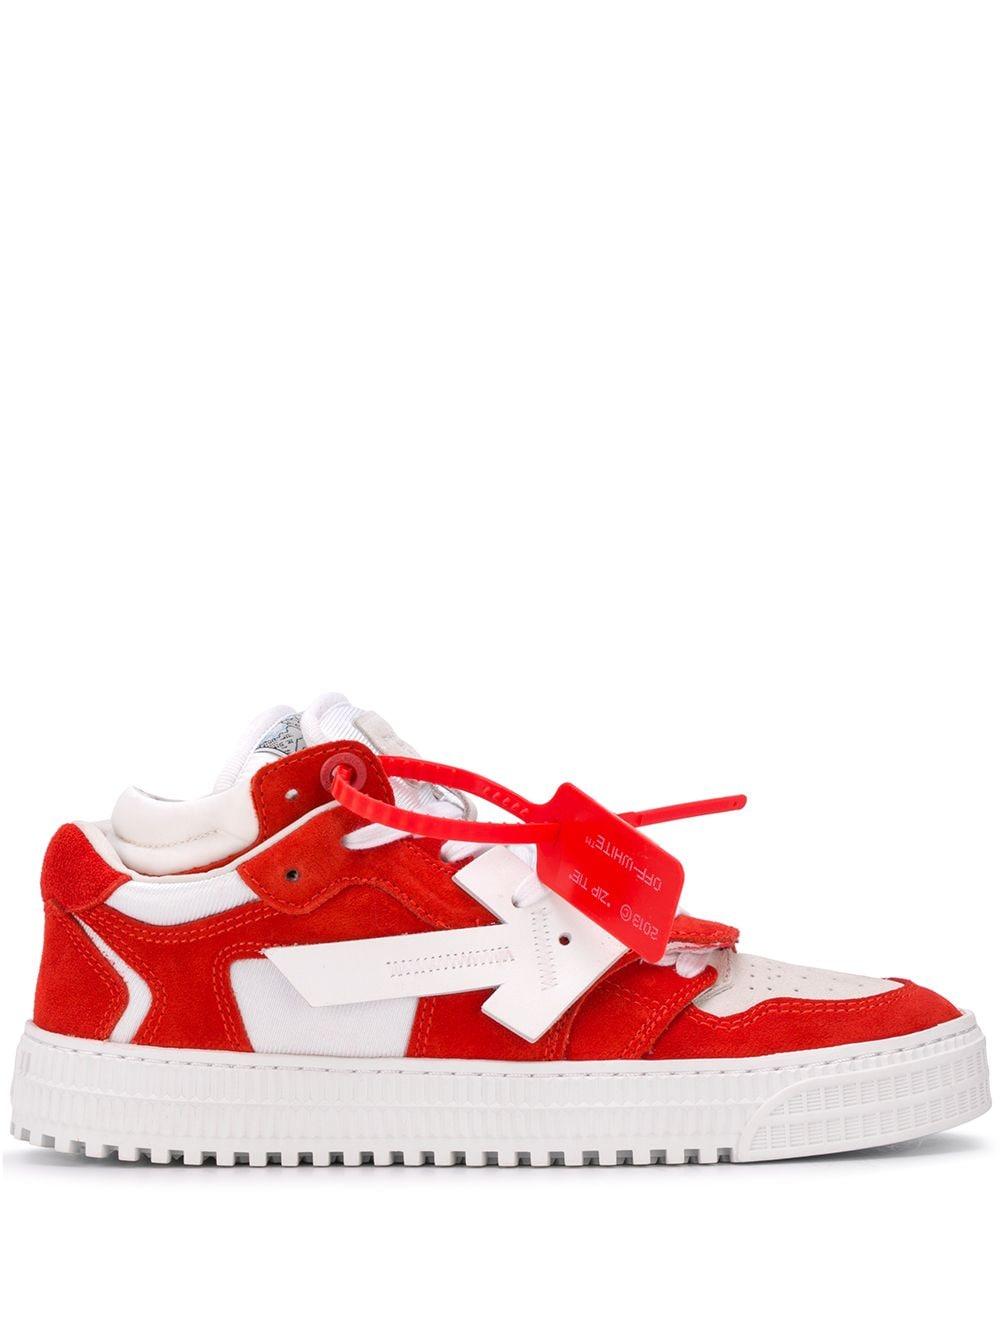 Off-White c/o Virgil Abloh Suede Red And White Off-court 3.0 Sneakers | Lyst